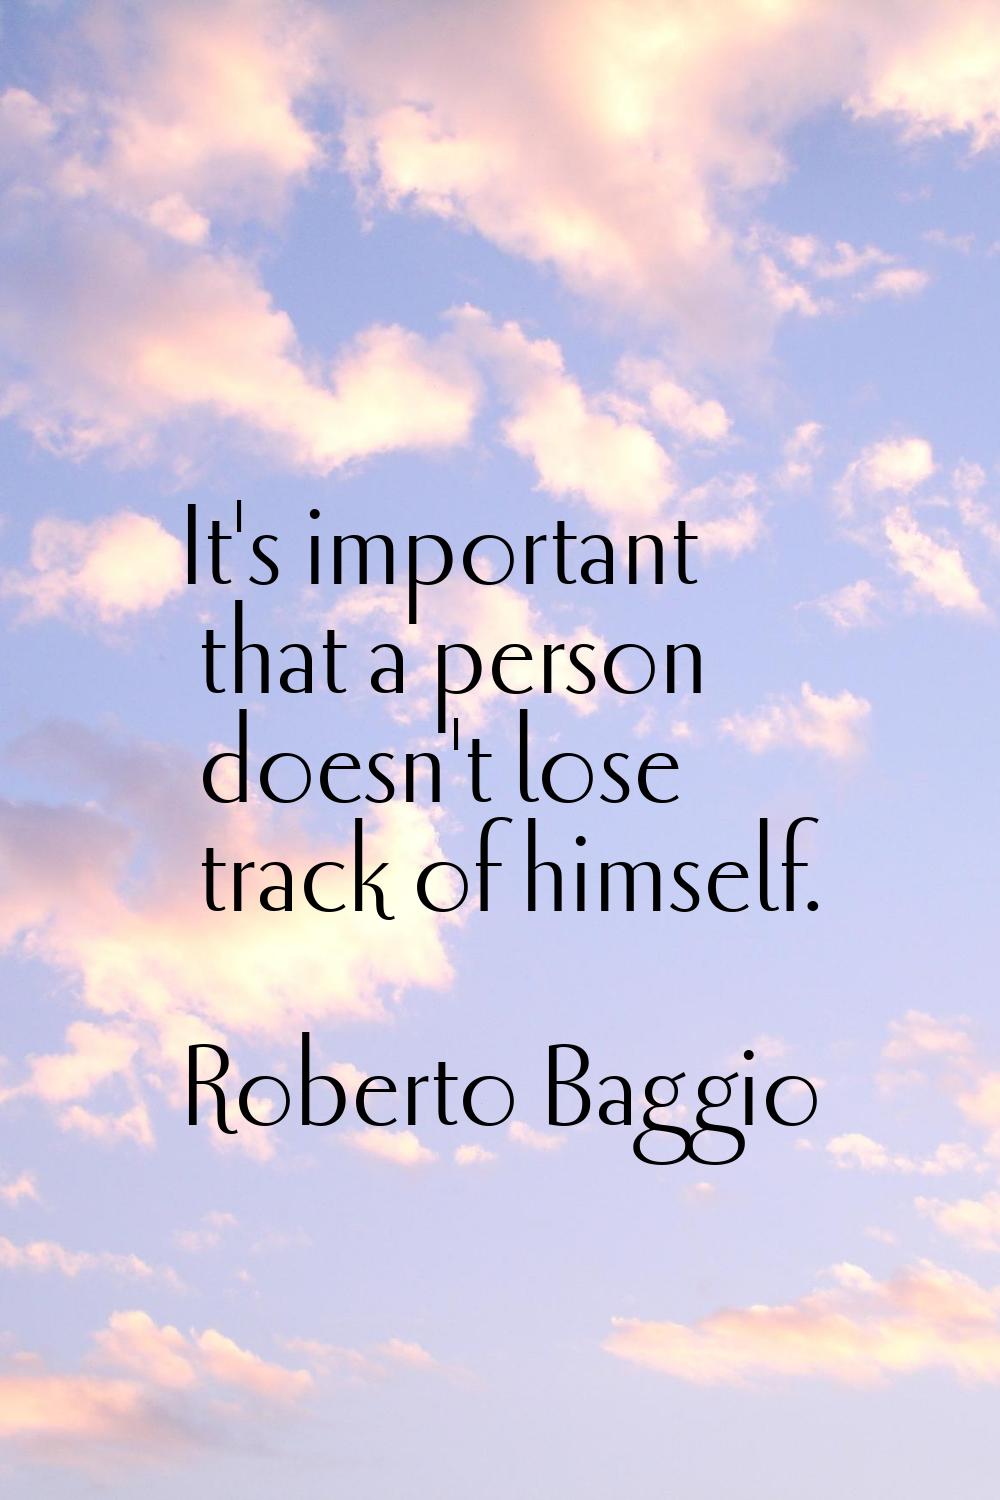 It's important that a person doesn't lose track of himself.